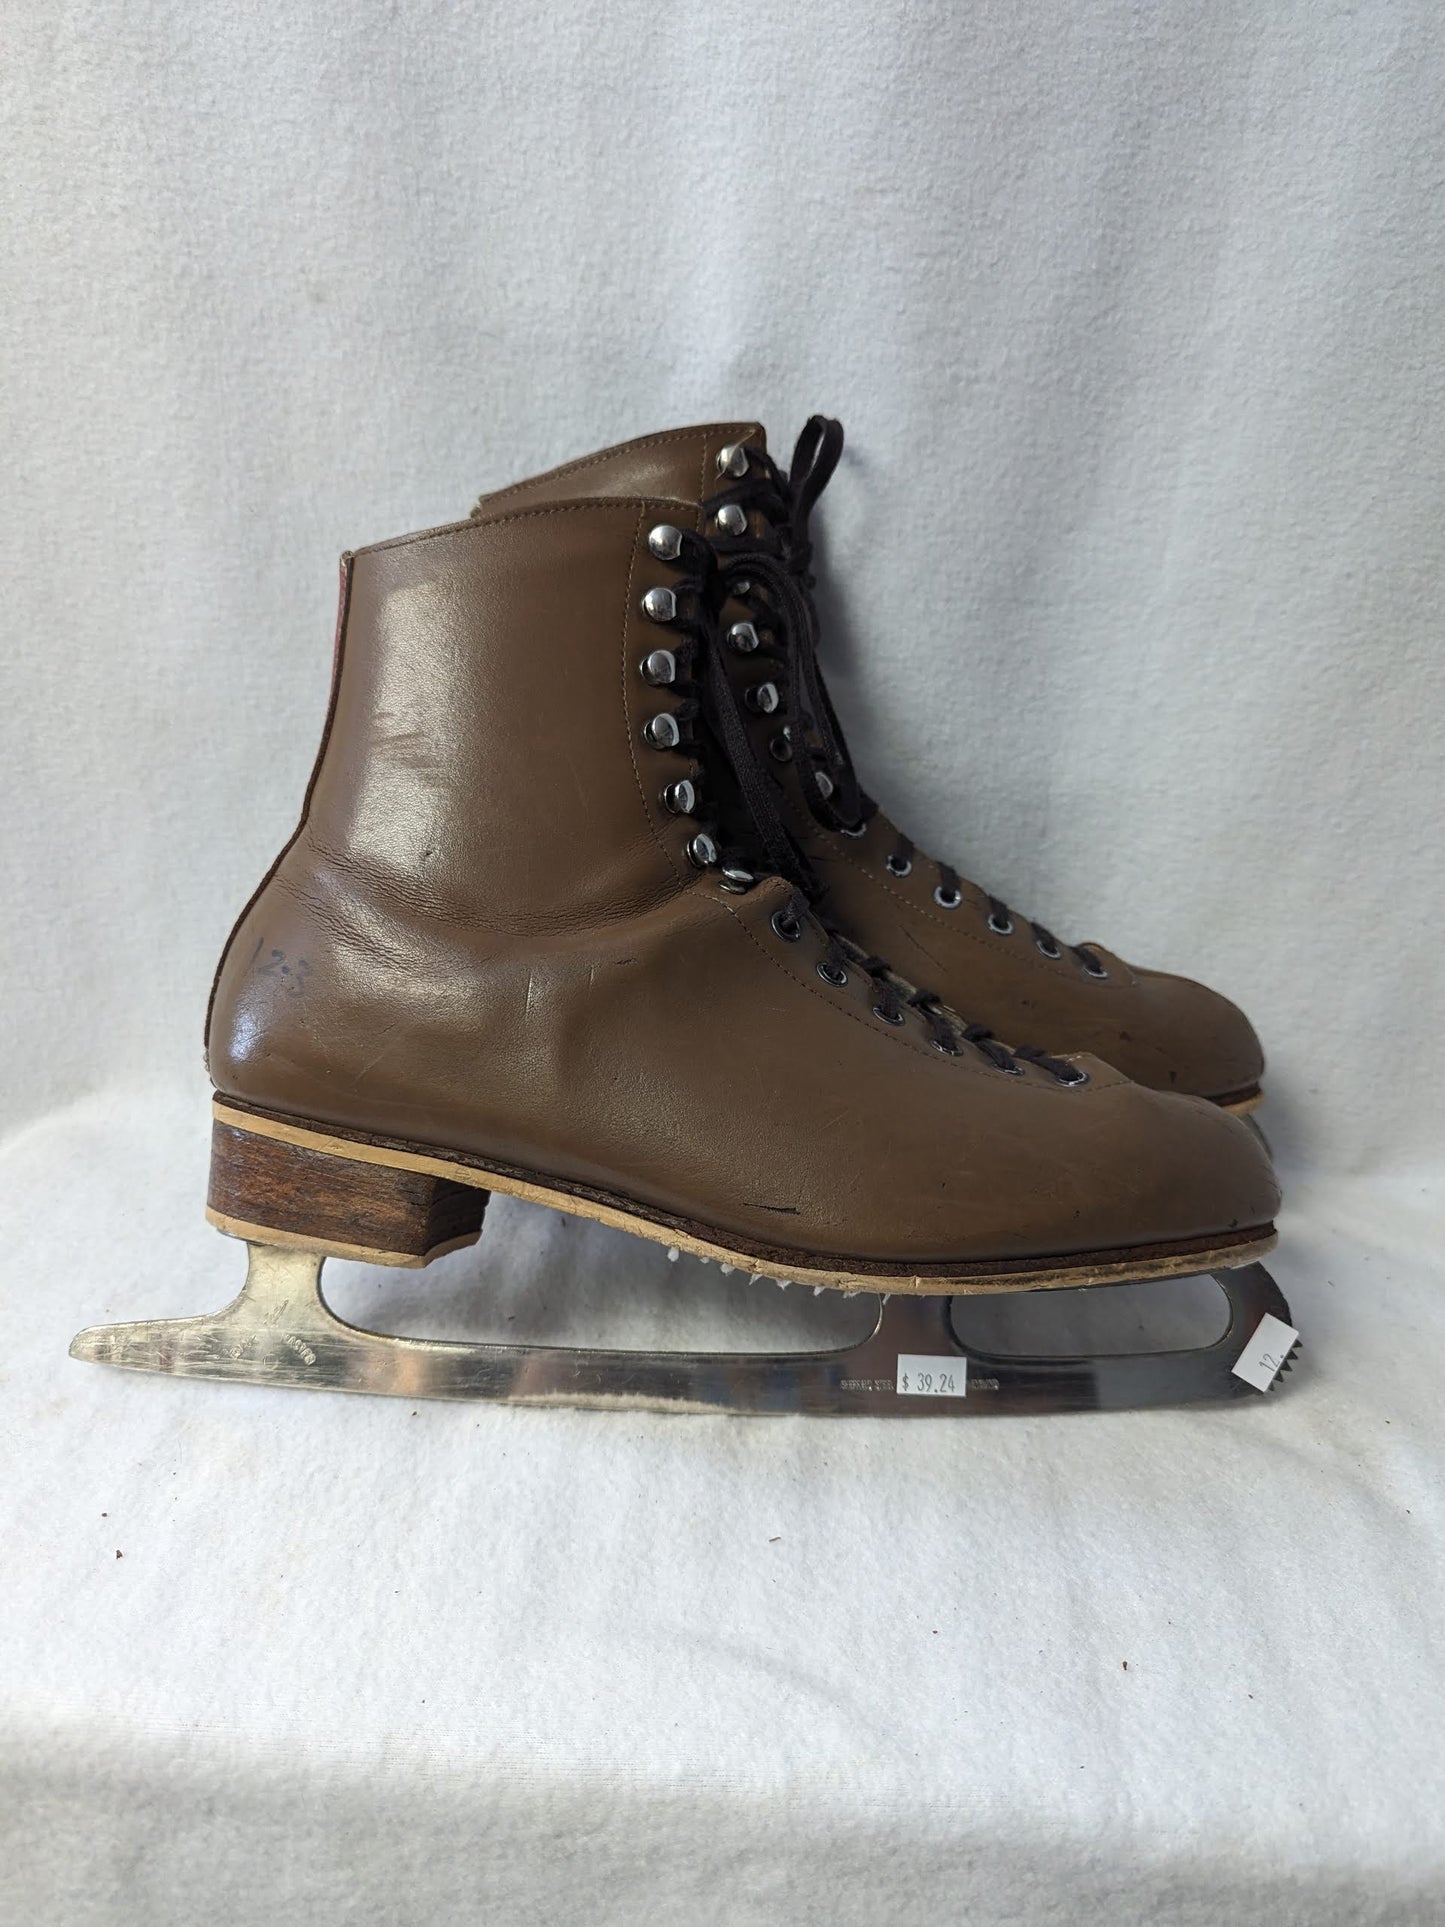 Rink Master Ice Skates Size 12 Color Brown Condition Used